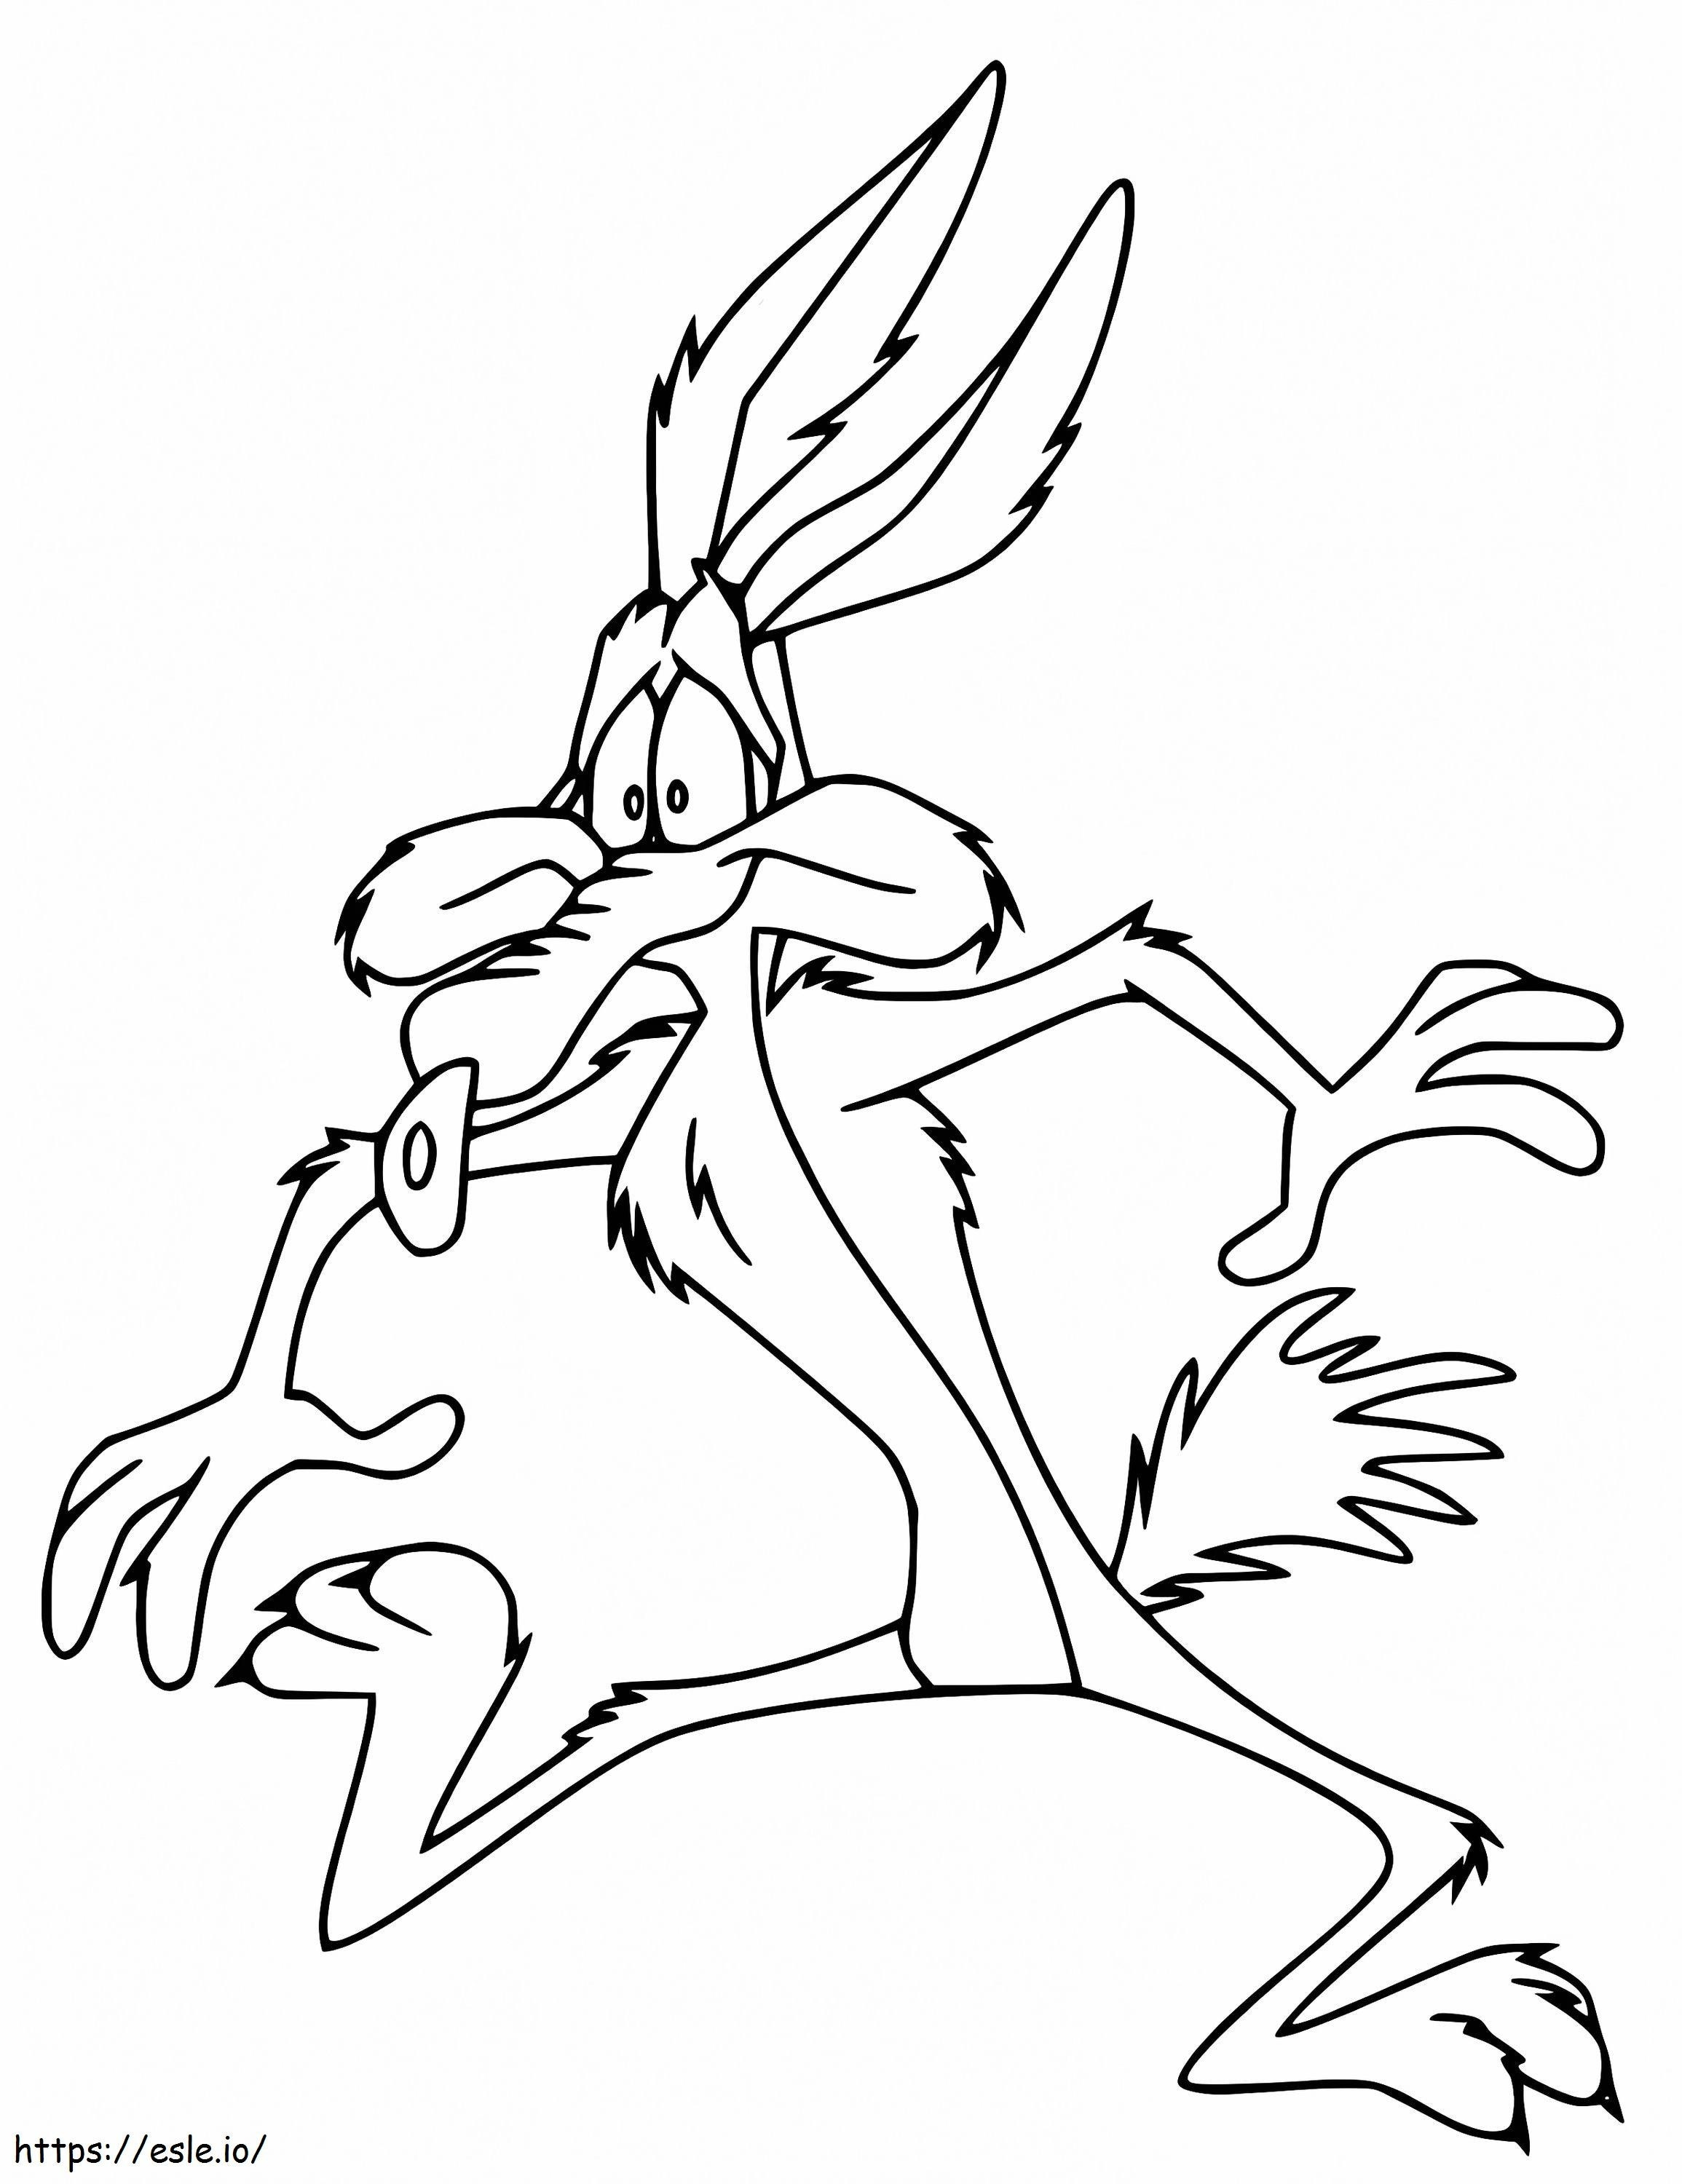 Funny Wile E Coyote coloring page